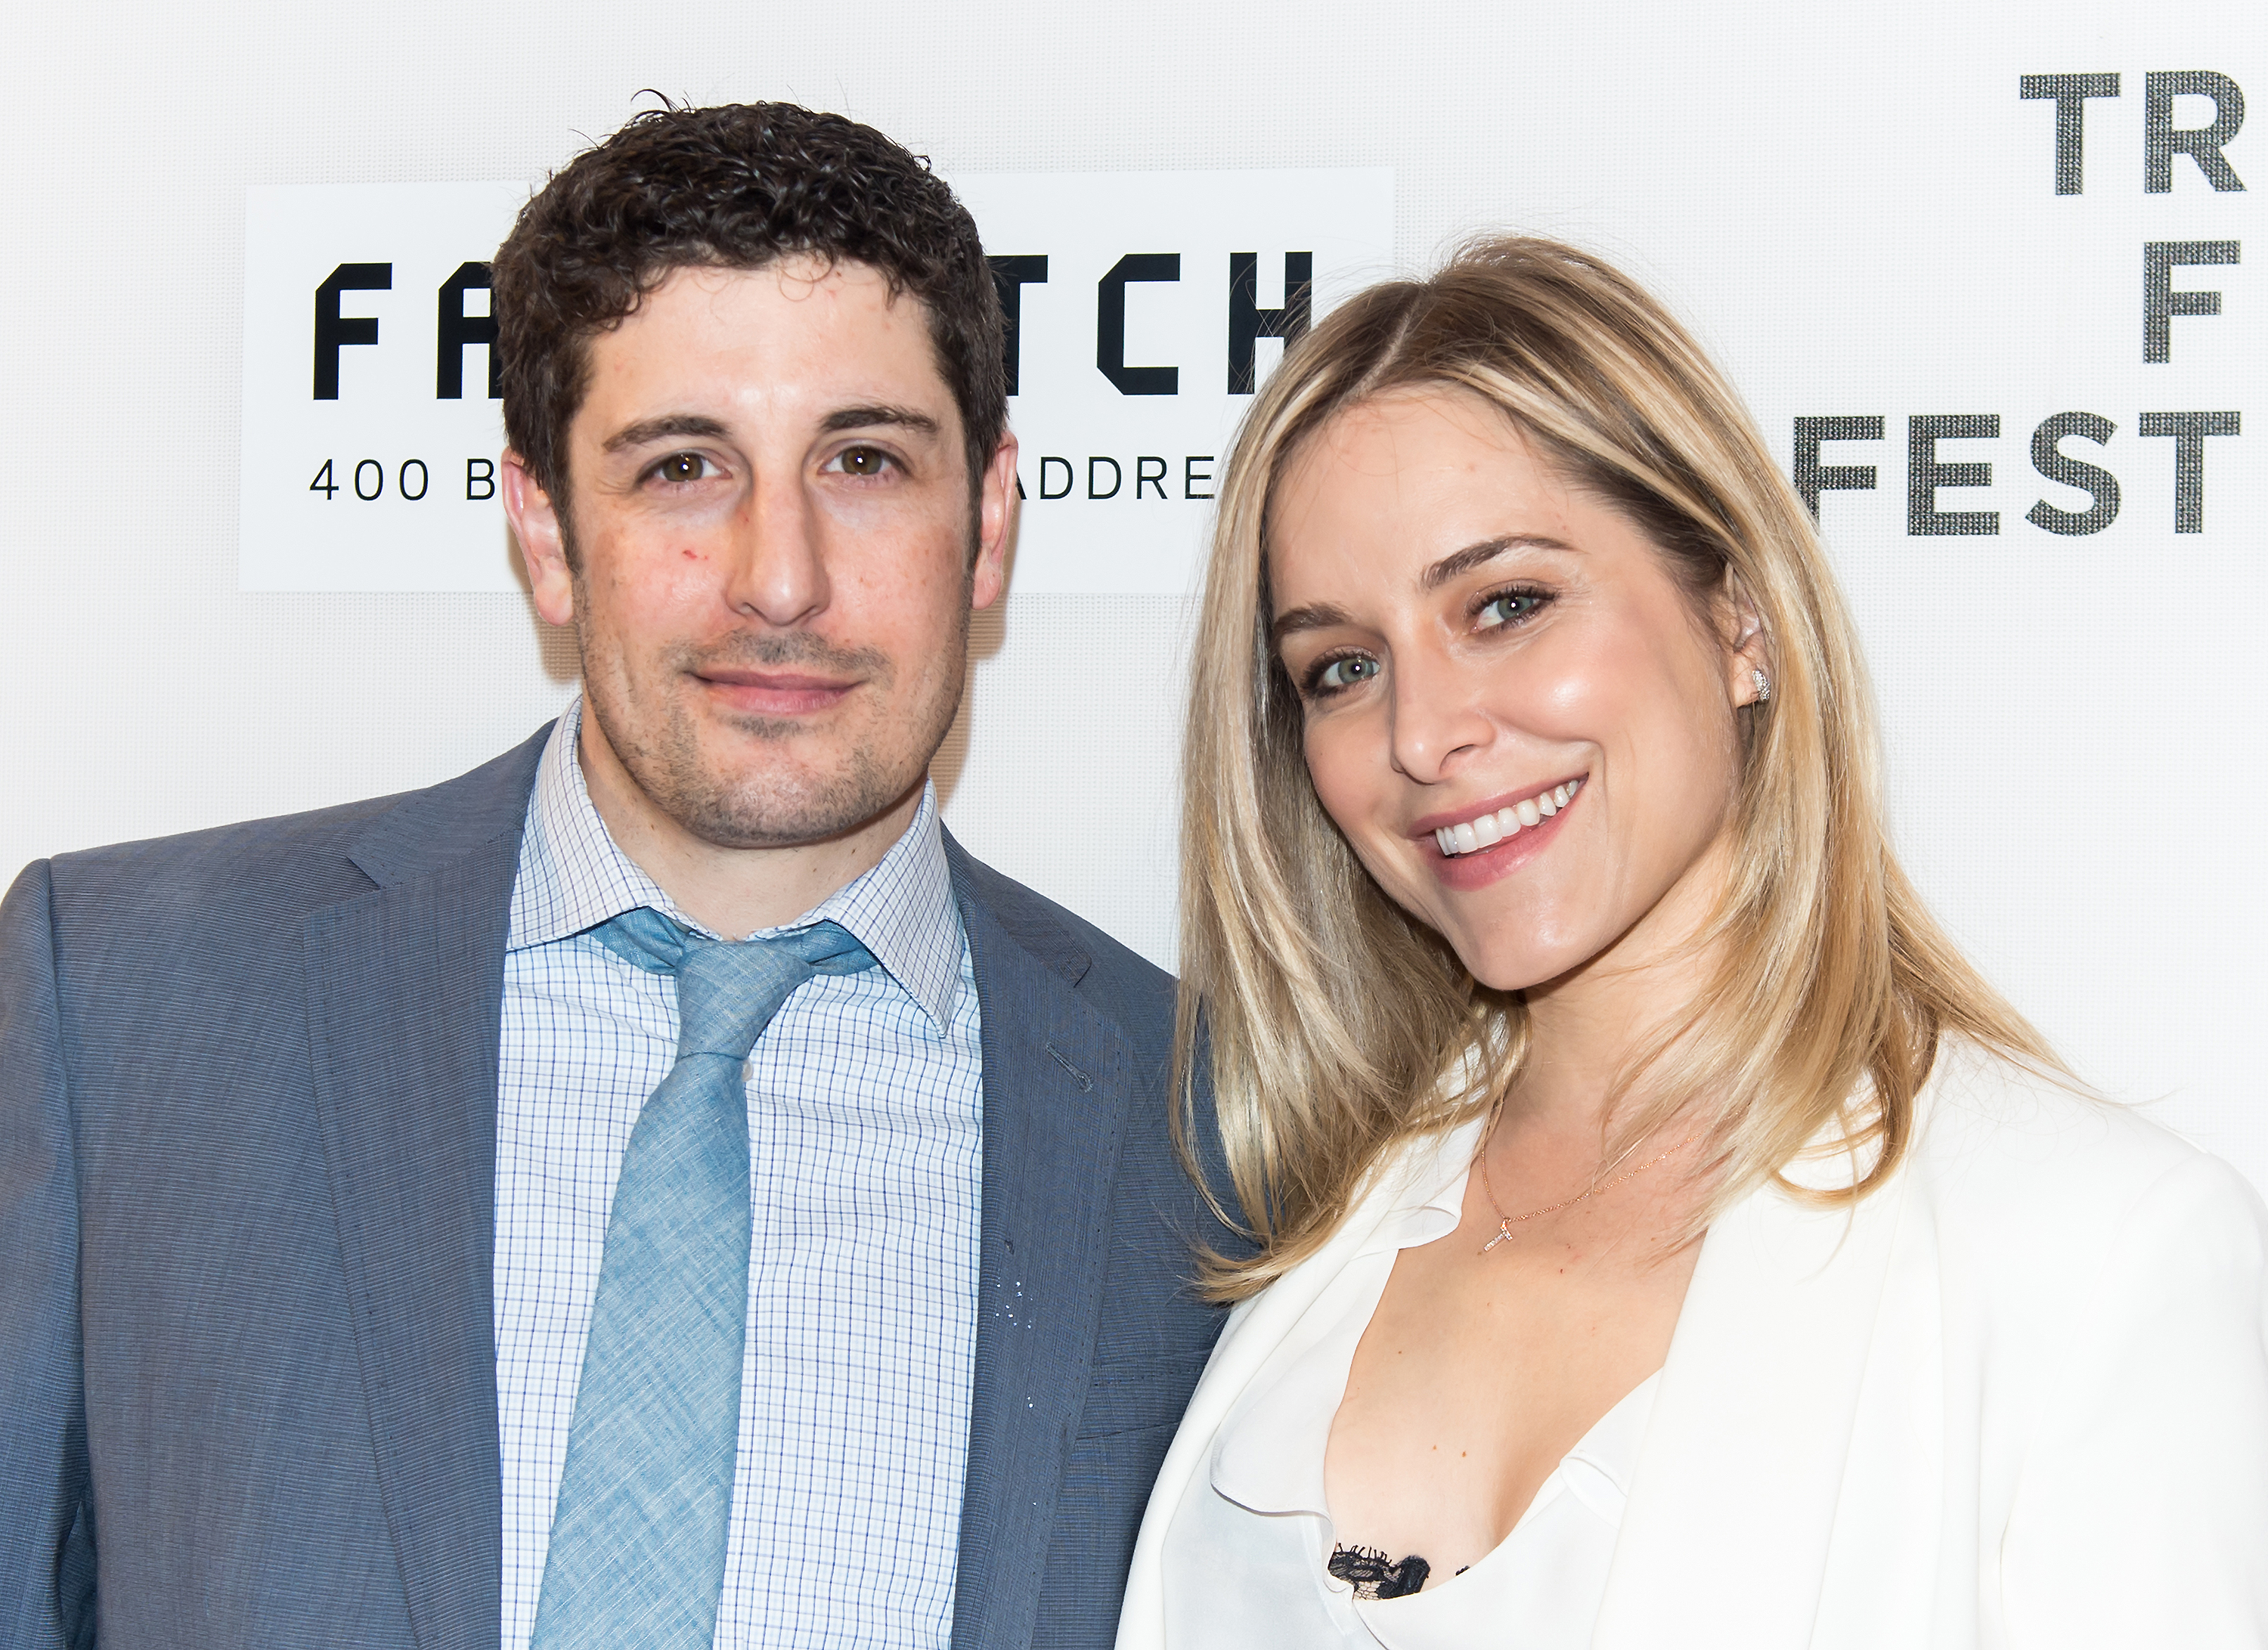 Jason Biggs Reveals How He Hid His Alcoholism From Wife Jenny Mollen